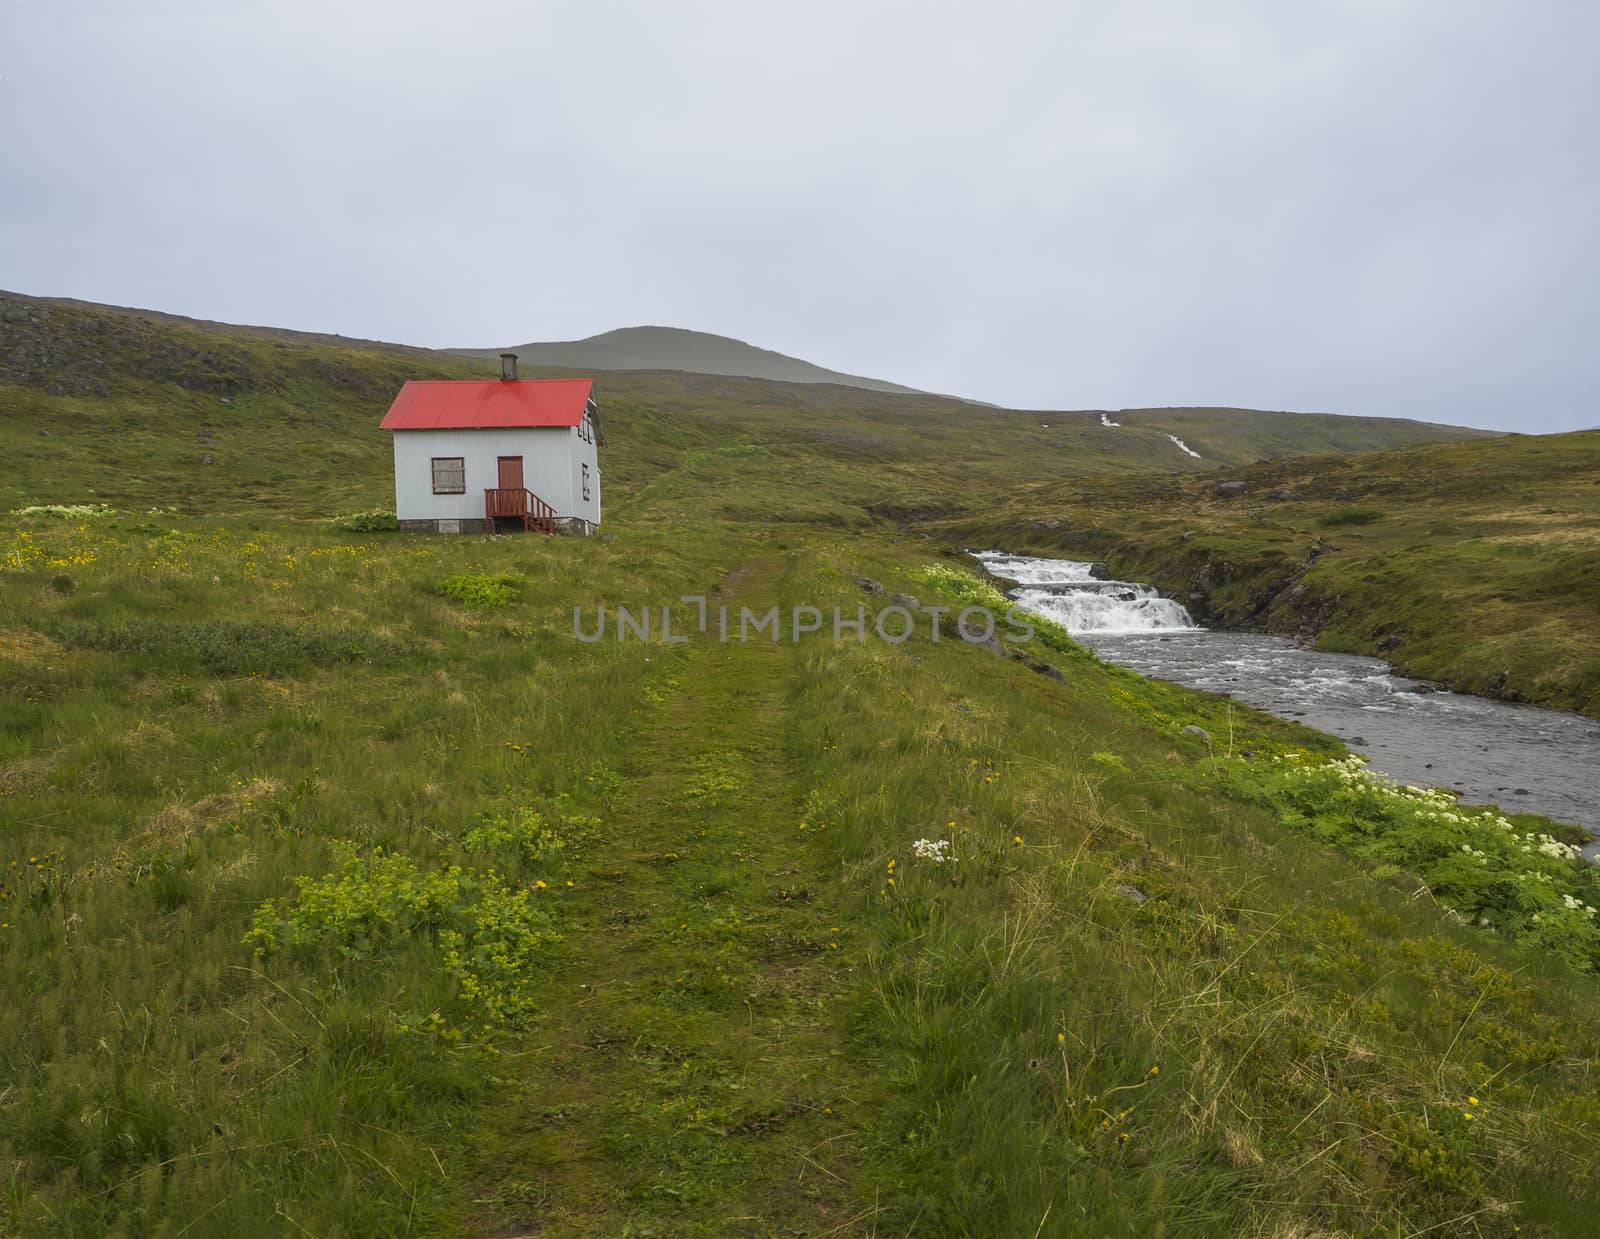 Footpath in abandoned village Heysteri in Iceland West fjords in remote nature reserve Hornstrandir, small white houses with red roof, lush green grass with flowers, river with water cascade and moody sky